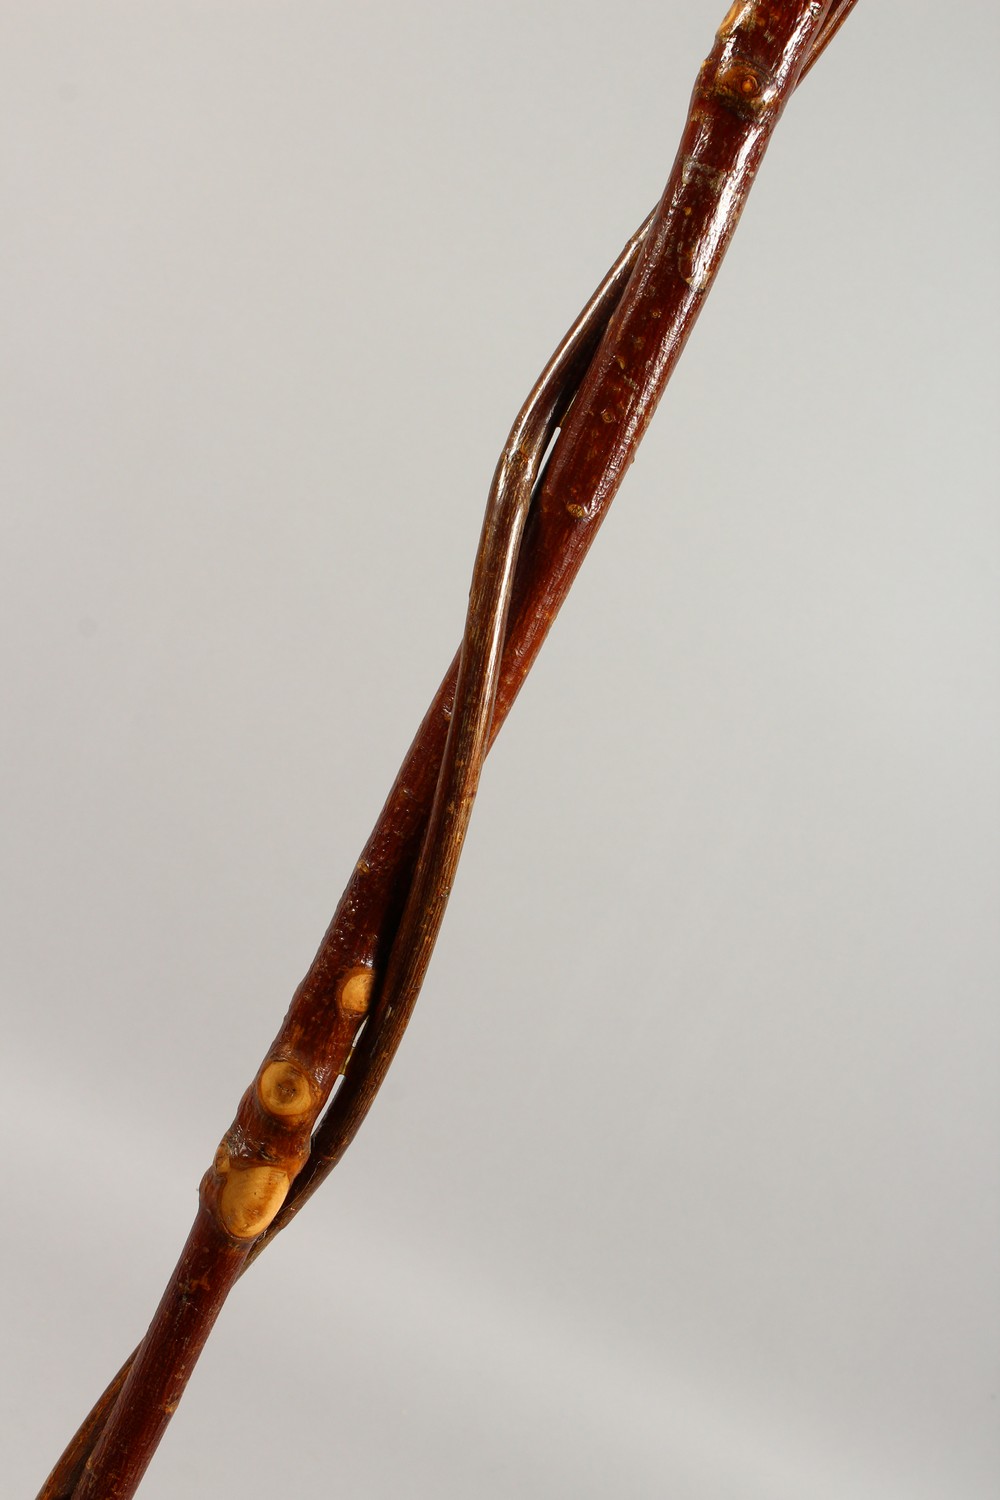 AN ENTWINED WALKING STICK, the handle carved as a pheasant. 55ins long. - Image 8 of 11